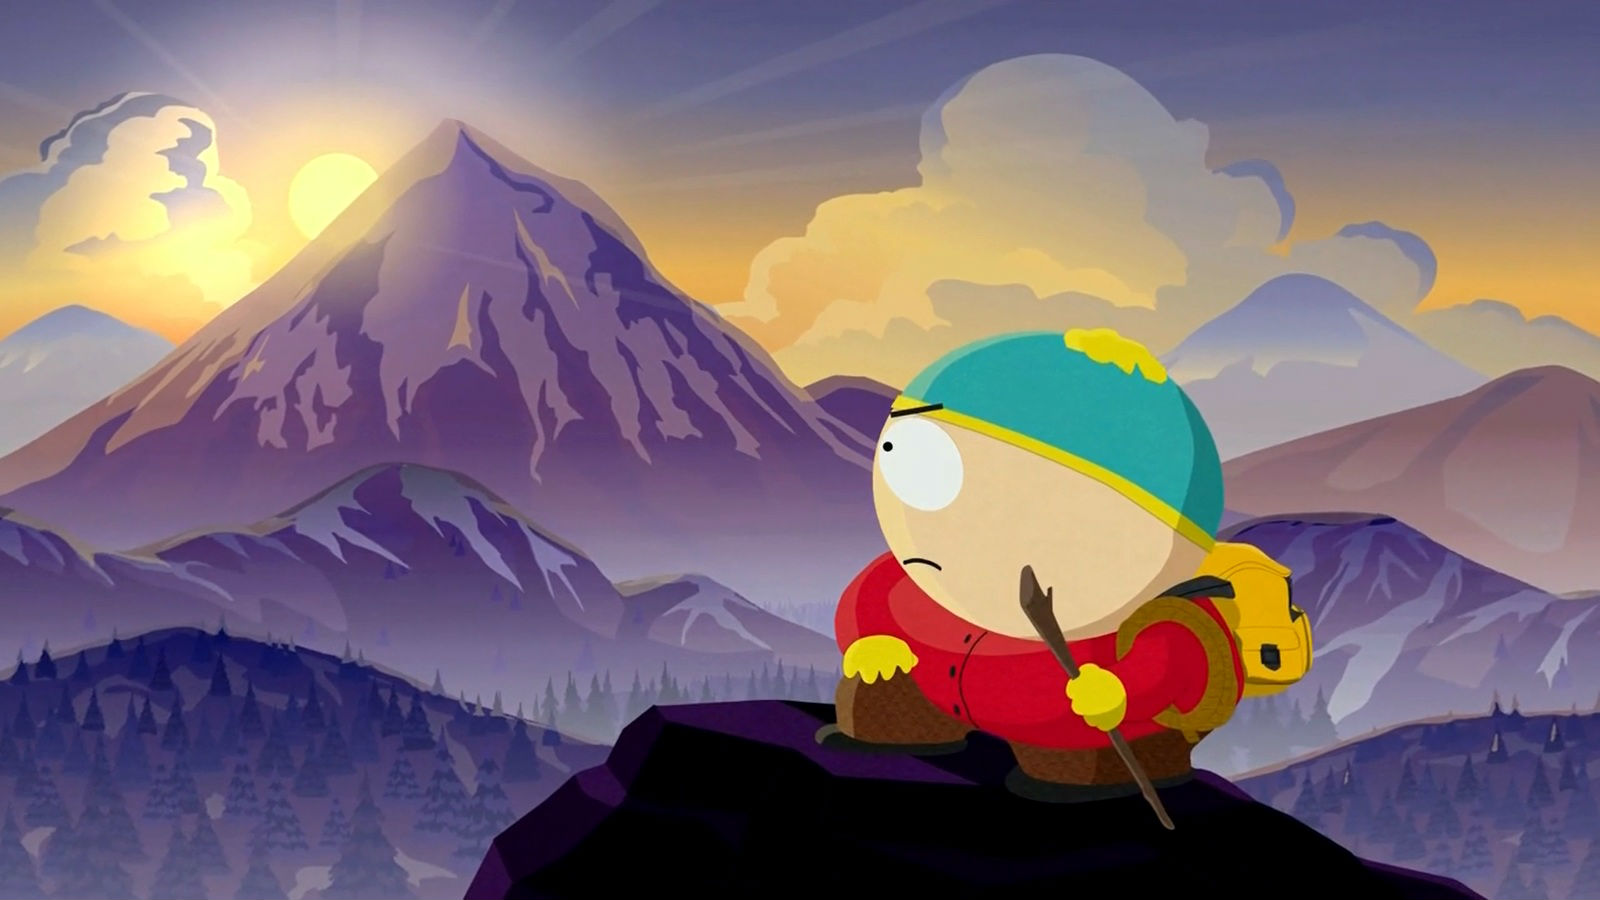 South Park - Some wallpapers from South Park: Phone... | Facebook